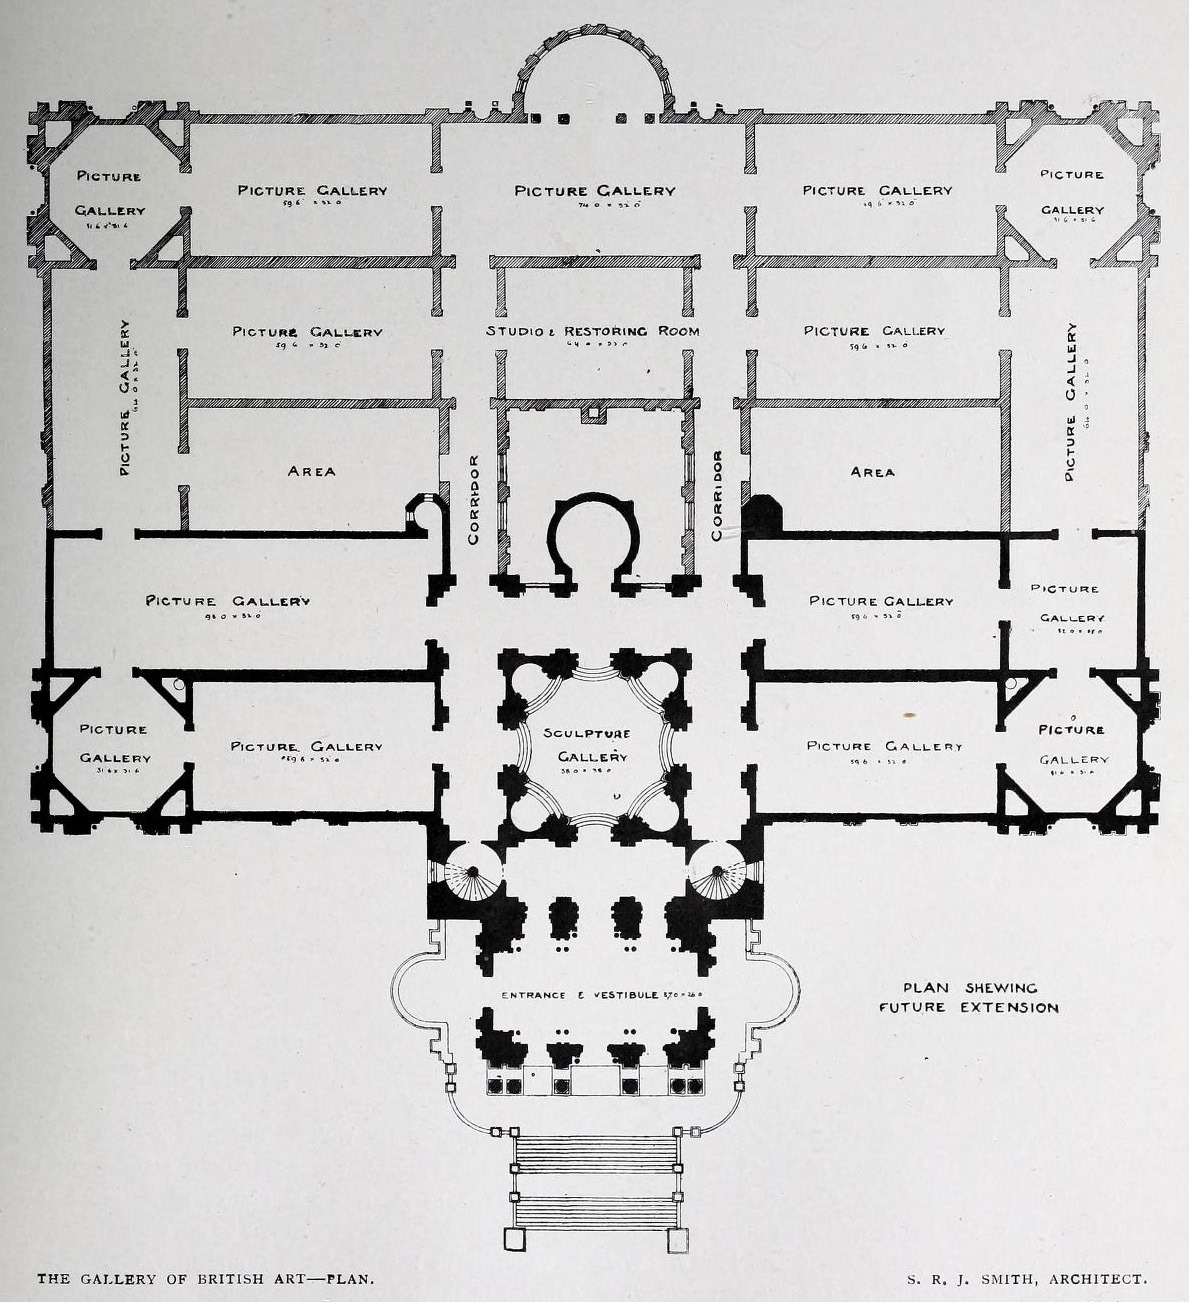 Floor plan for the Tate Gallery, London